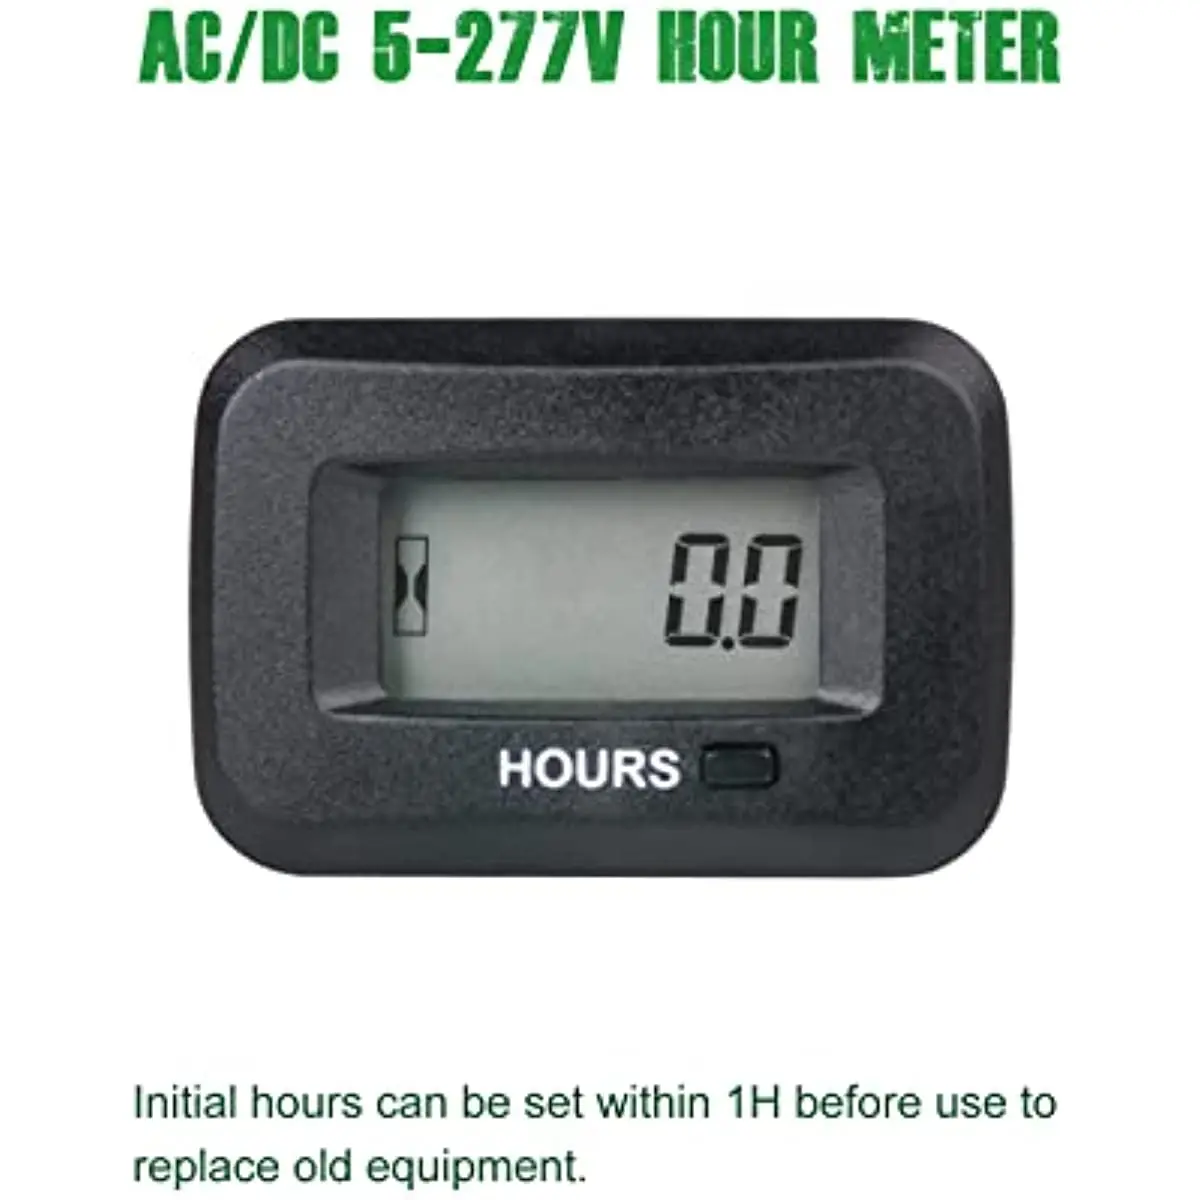 

Maintenance Hour Meter Settable Initial Digital Supply Counter Timer for ACDC 5-277V Various of Lawn Mower Tractor Generator